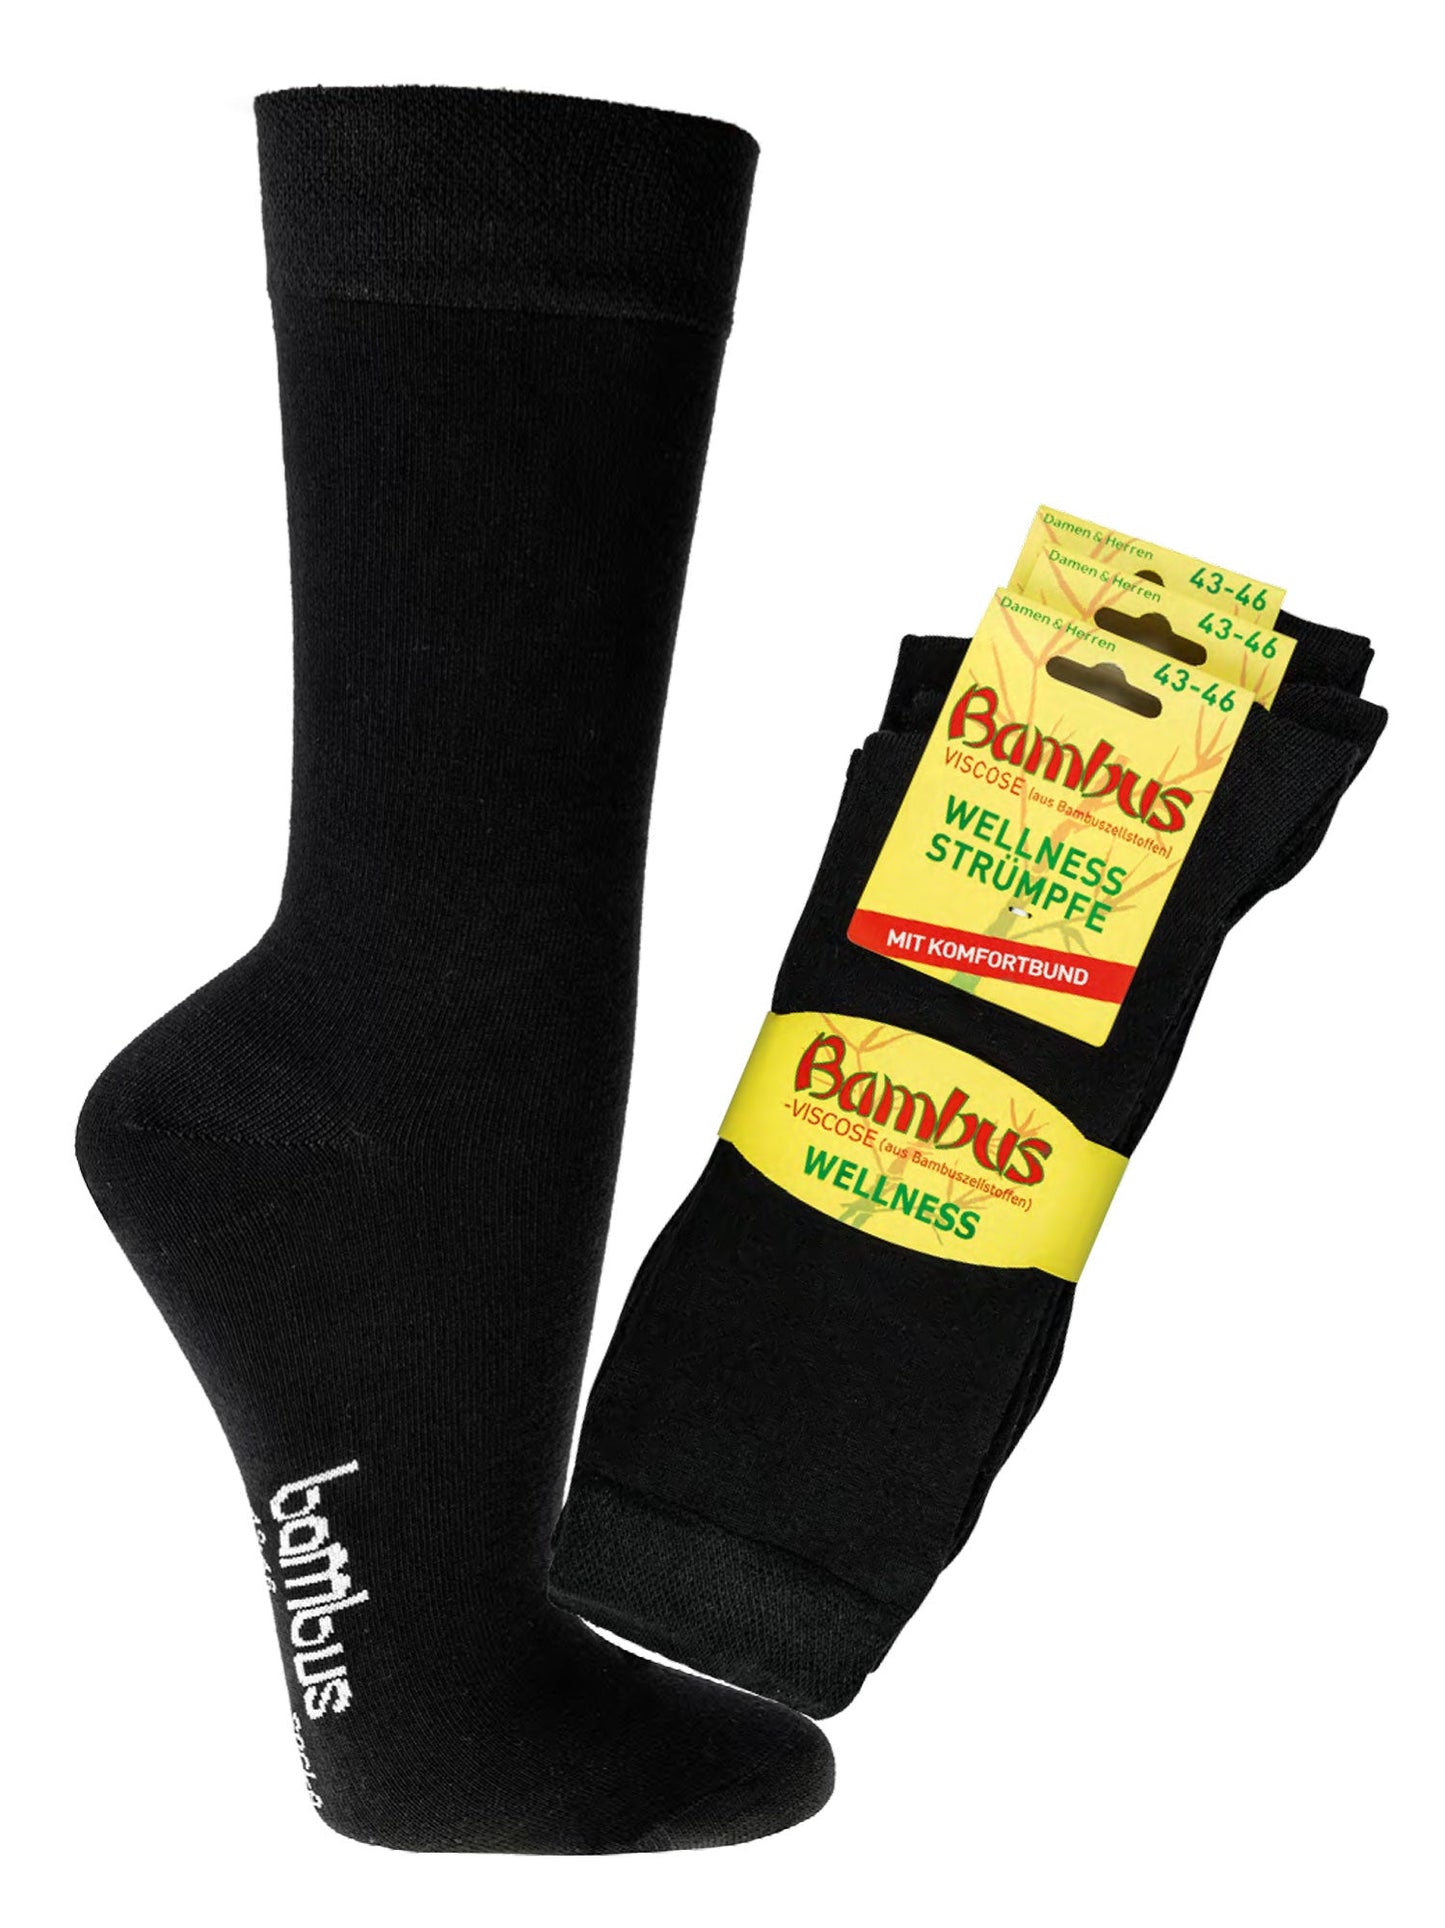 3-15 pairs of bamboo viscose socks reinforced for longer durability for men and women